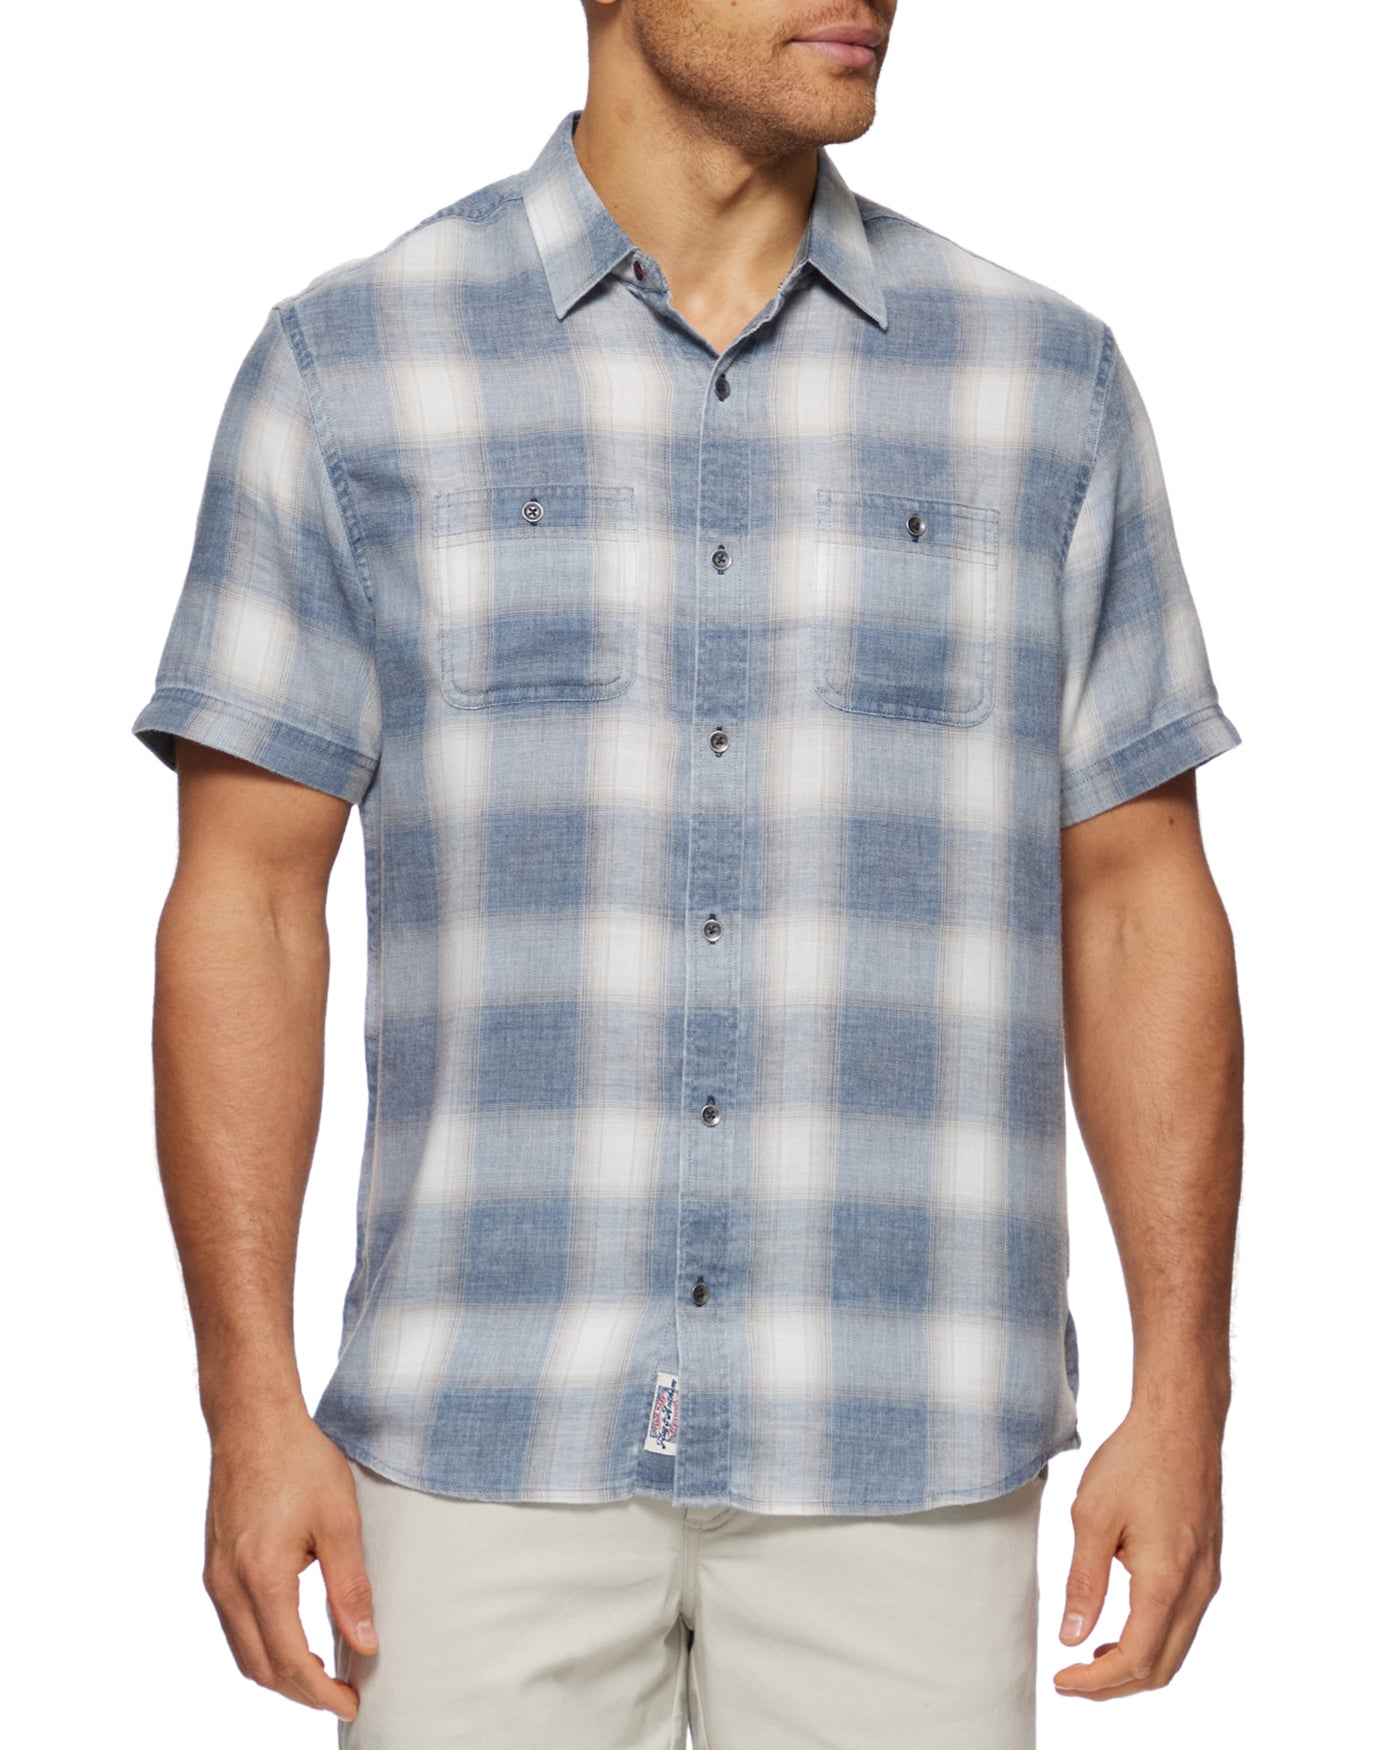 LUTHER VINTAGE SOFT STRETCH SHIRT